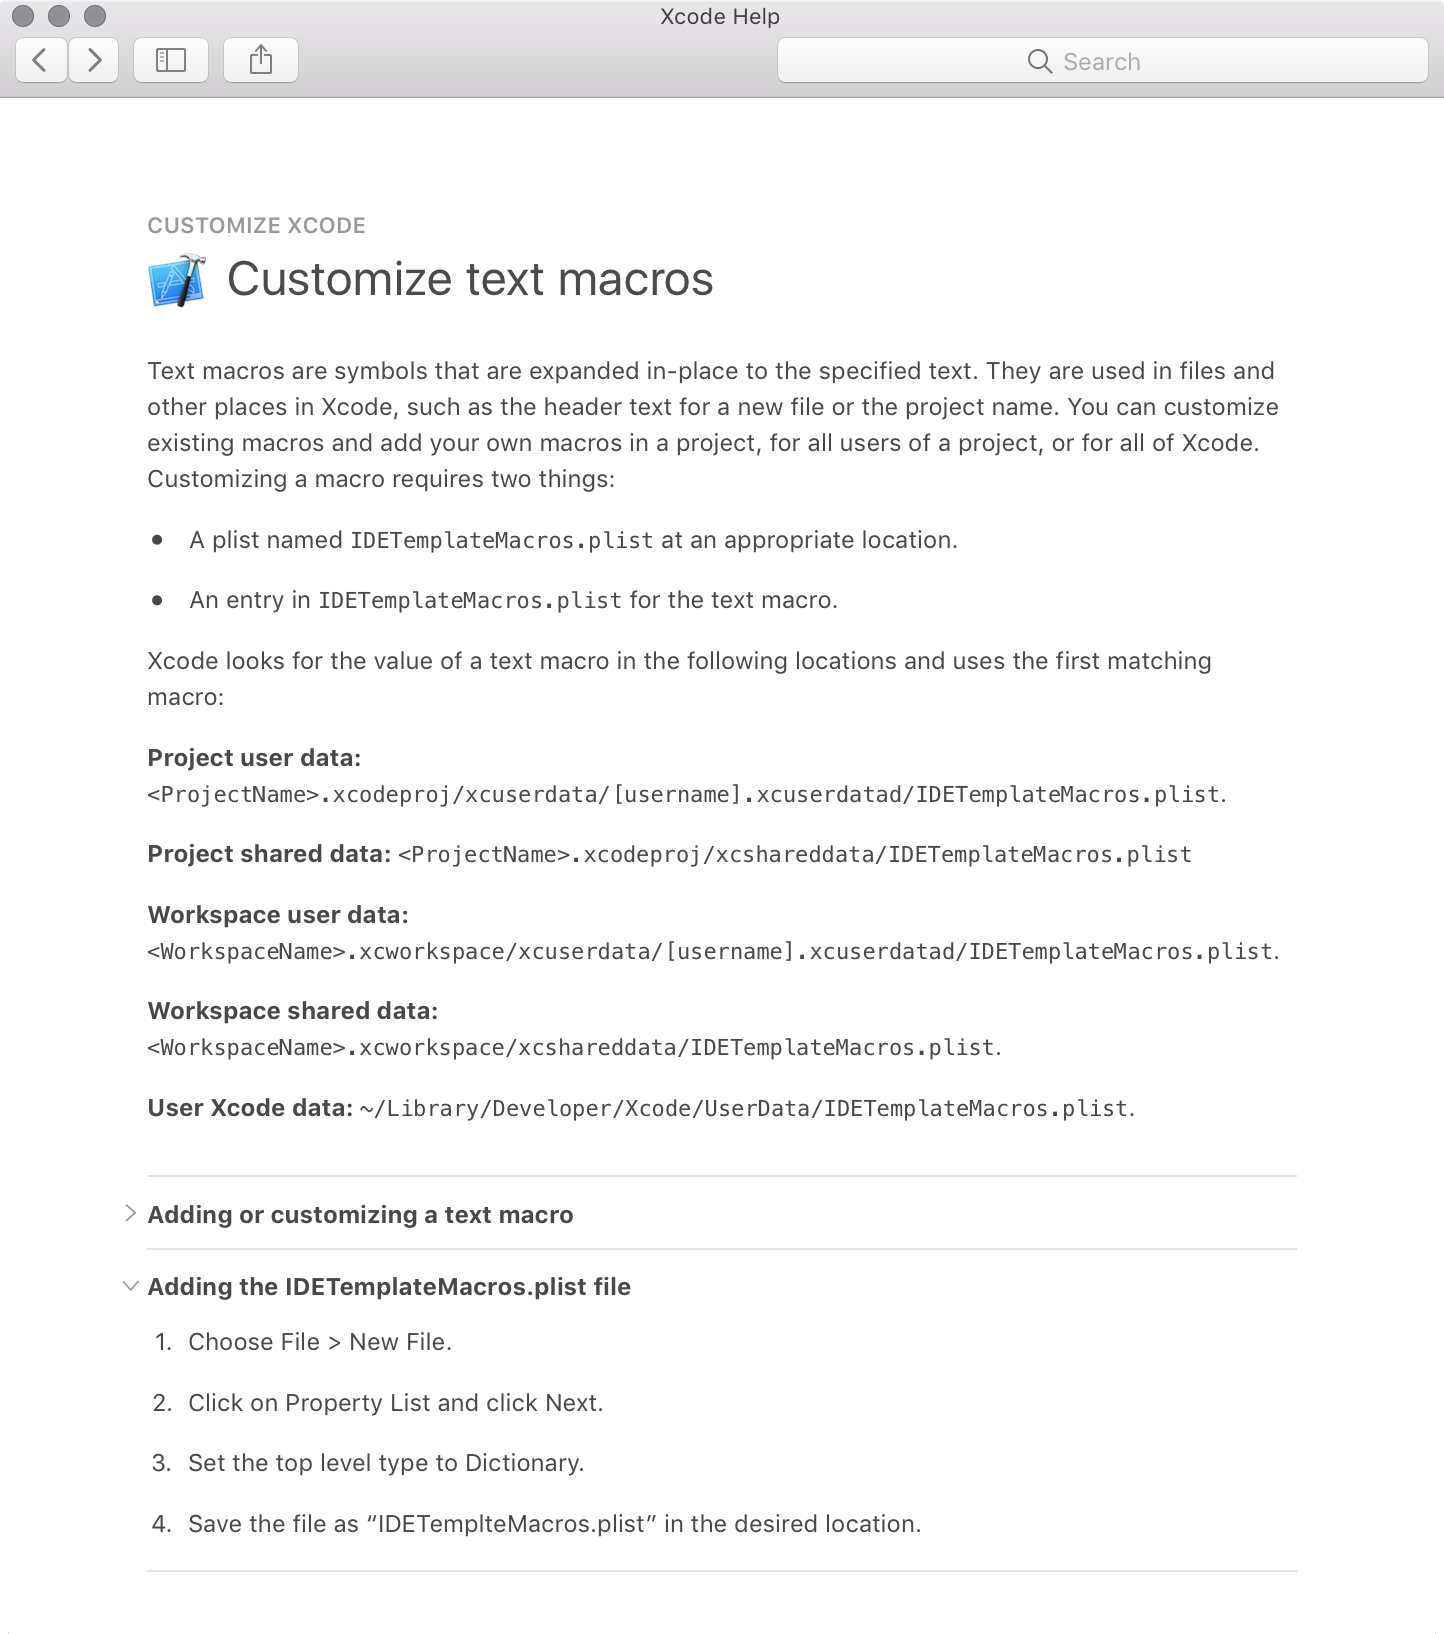 The Customize Text Macros page in Xcode Help